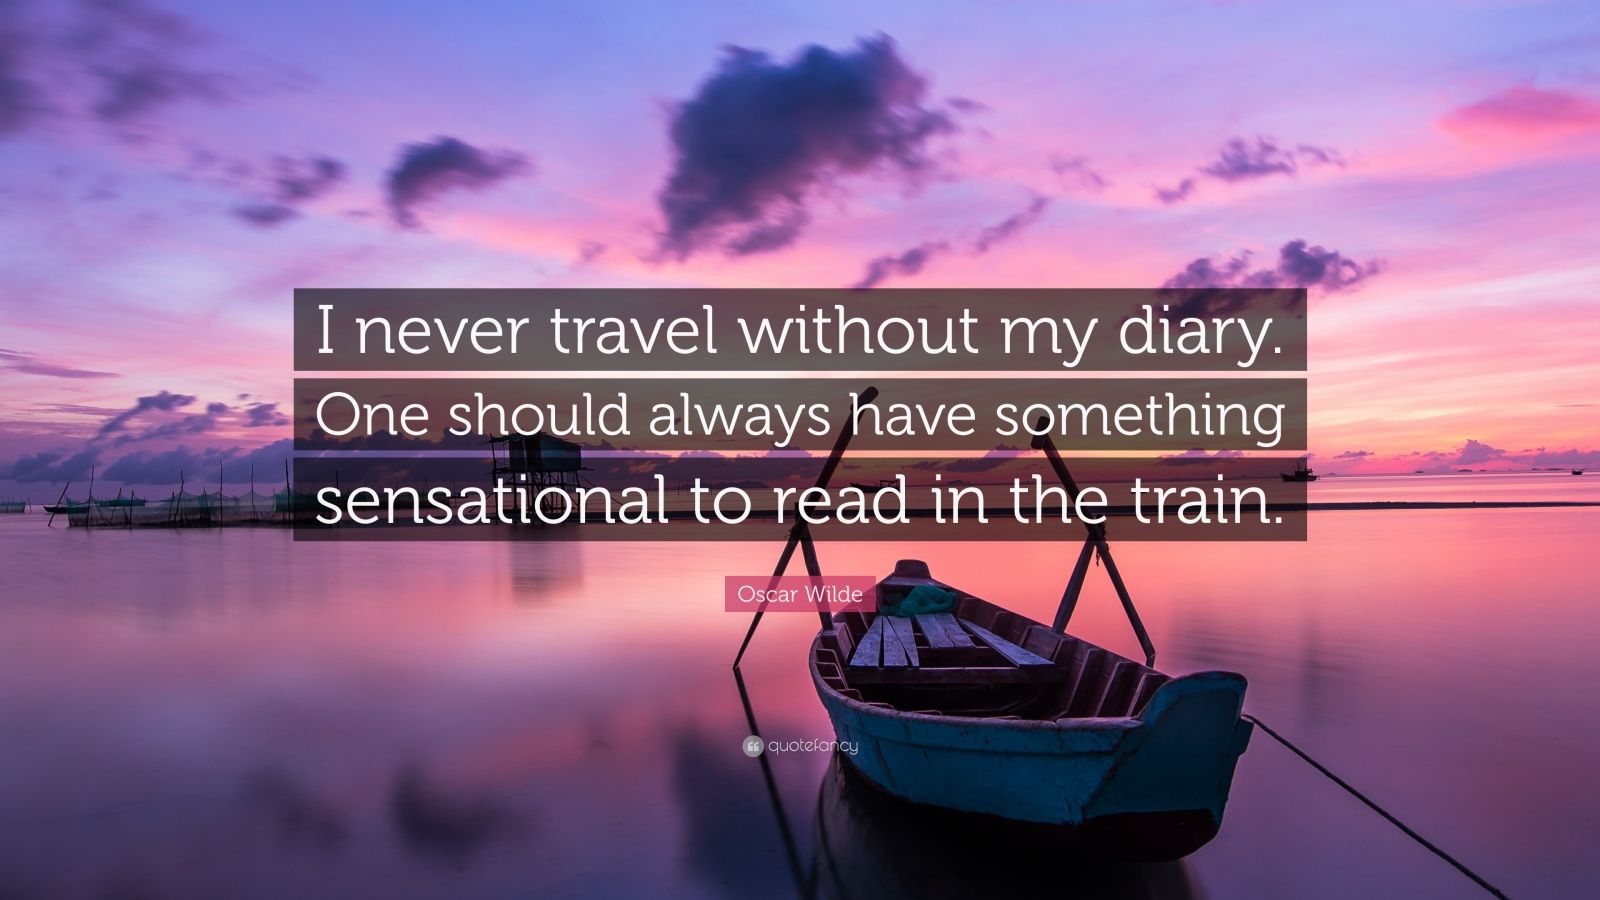 i never travel without my diary meaning